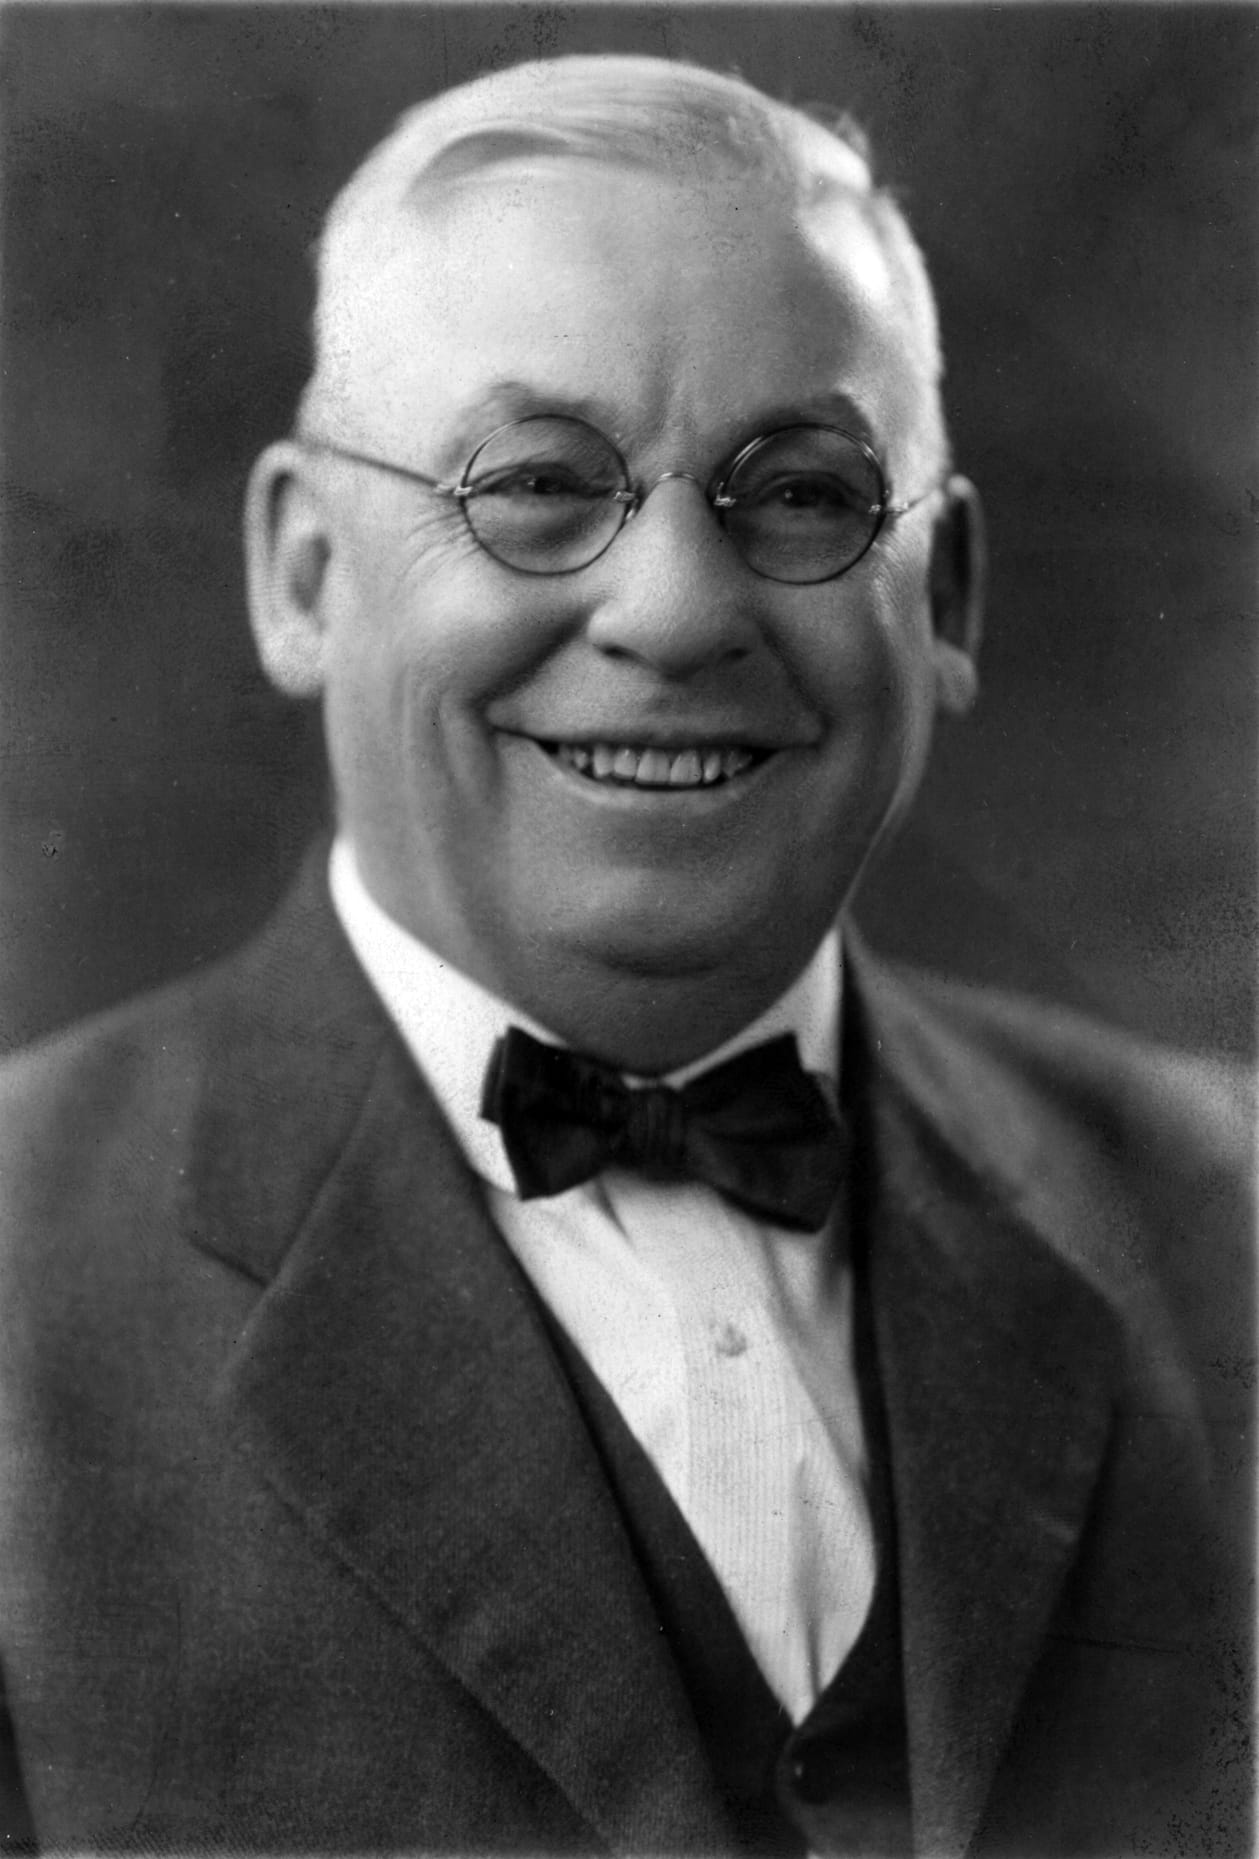 A portrait of J. Peterson Ryder from 1931. Photo courtesy University Archives.